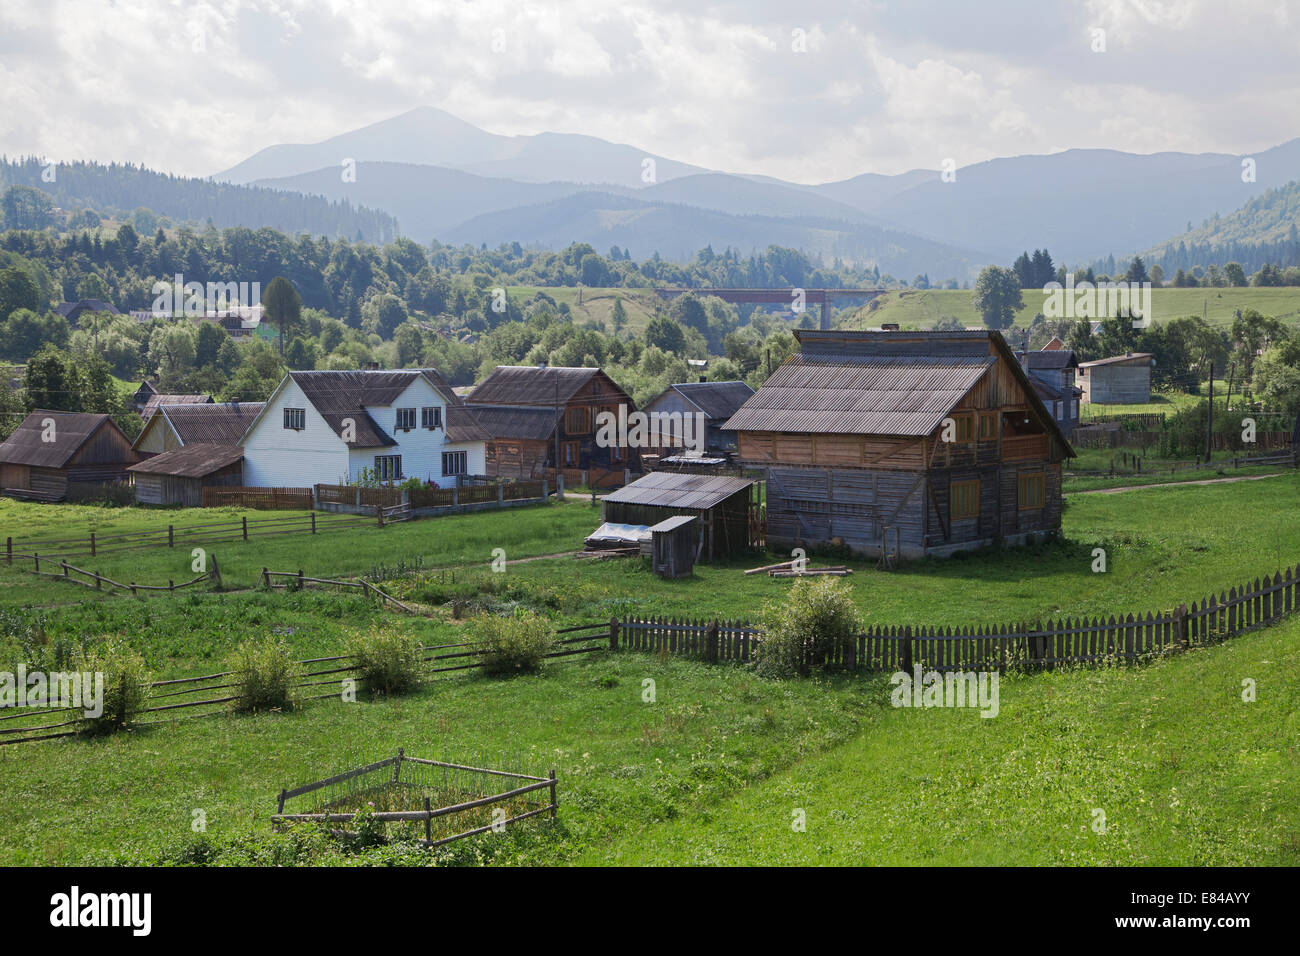 Village in Eastern Carpathian mountains - traditional way of life Stock Photo